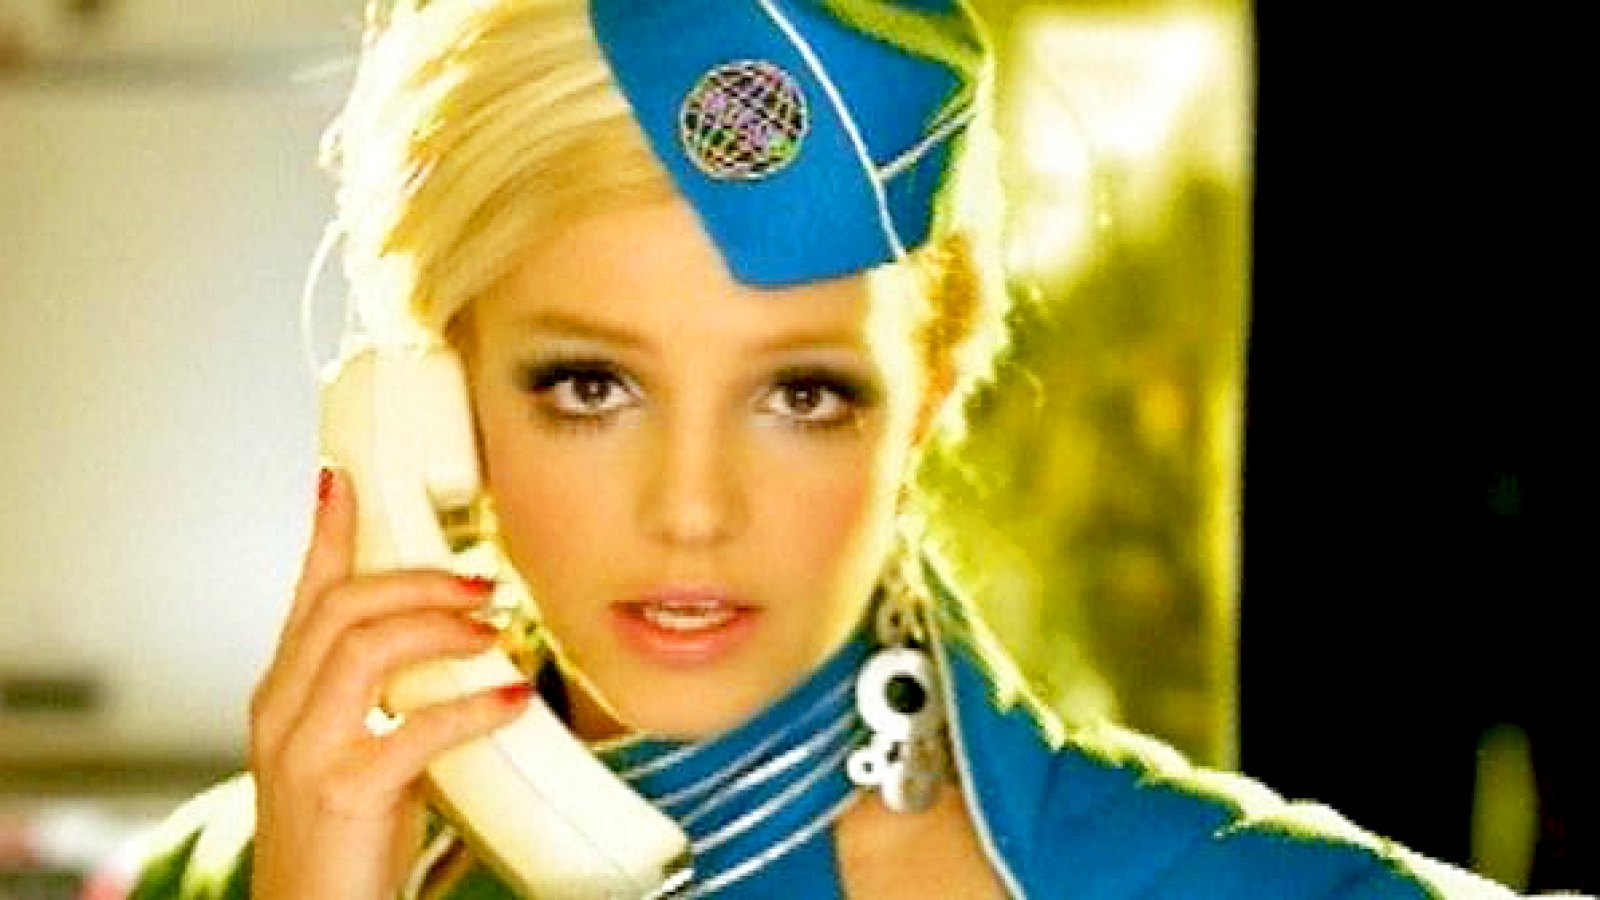 Britney Spears' 12 Most Iconic Music Video Moments in GIFs